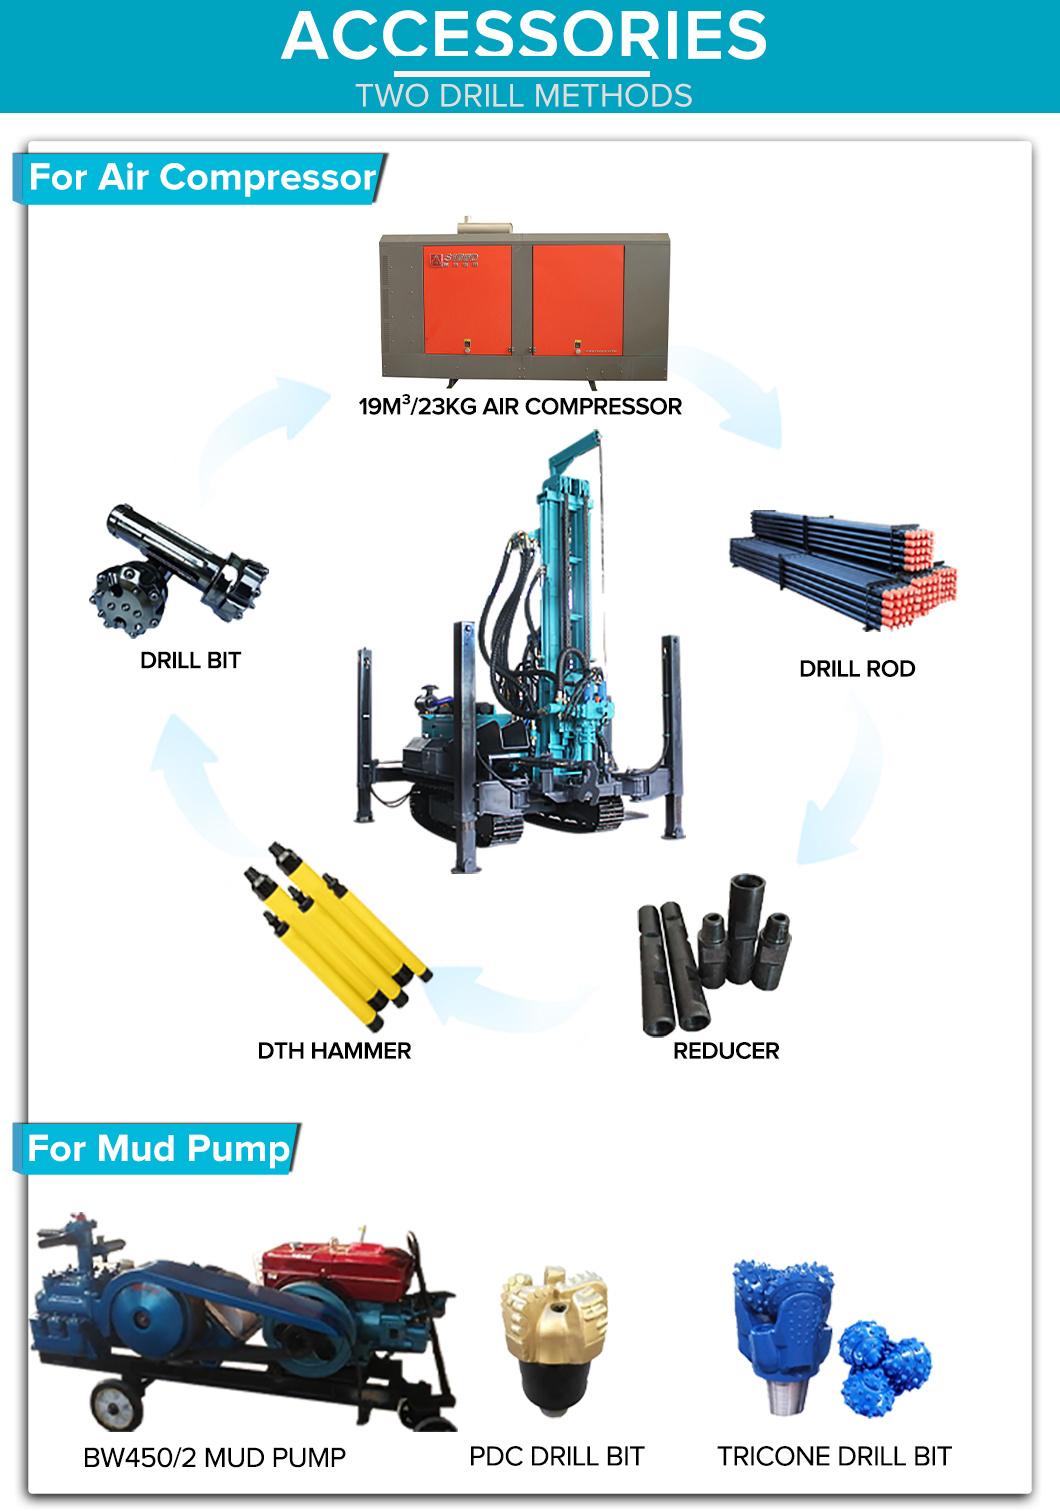 Best Selling Turntable Water Well Drilling Rig Factory Price